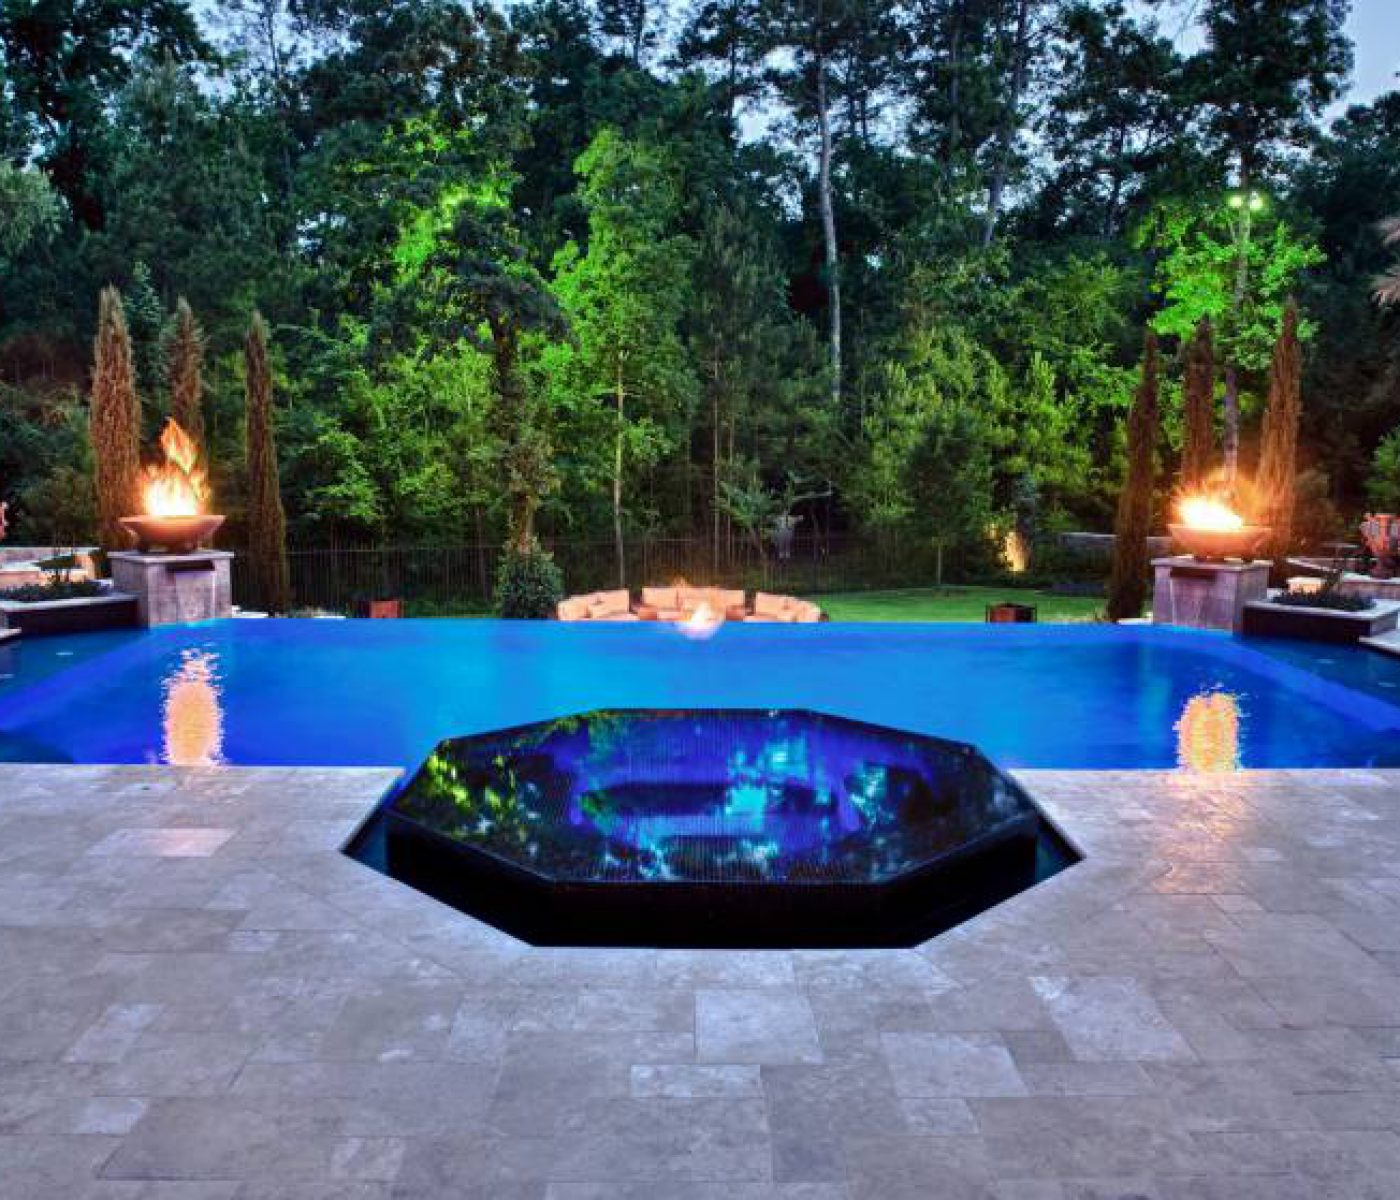 POOLS AND WATER FEATURES